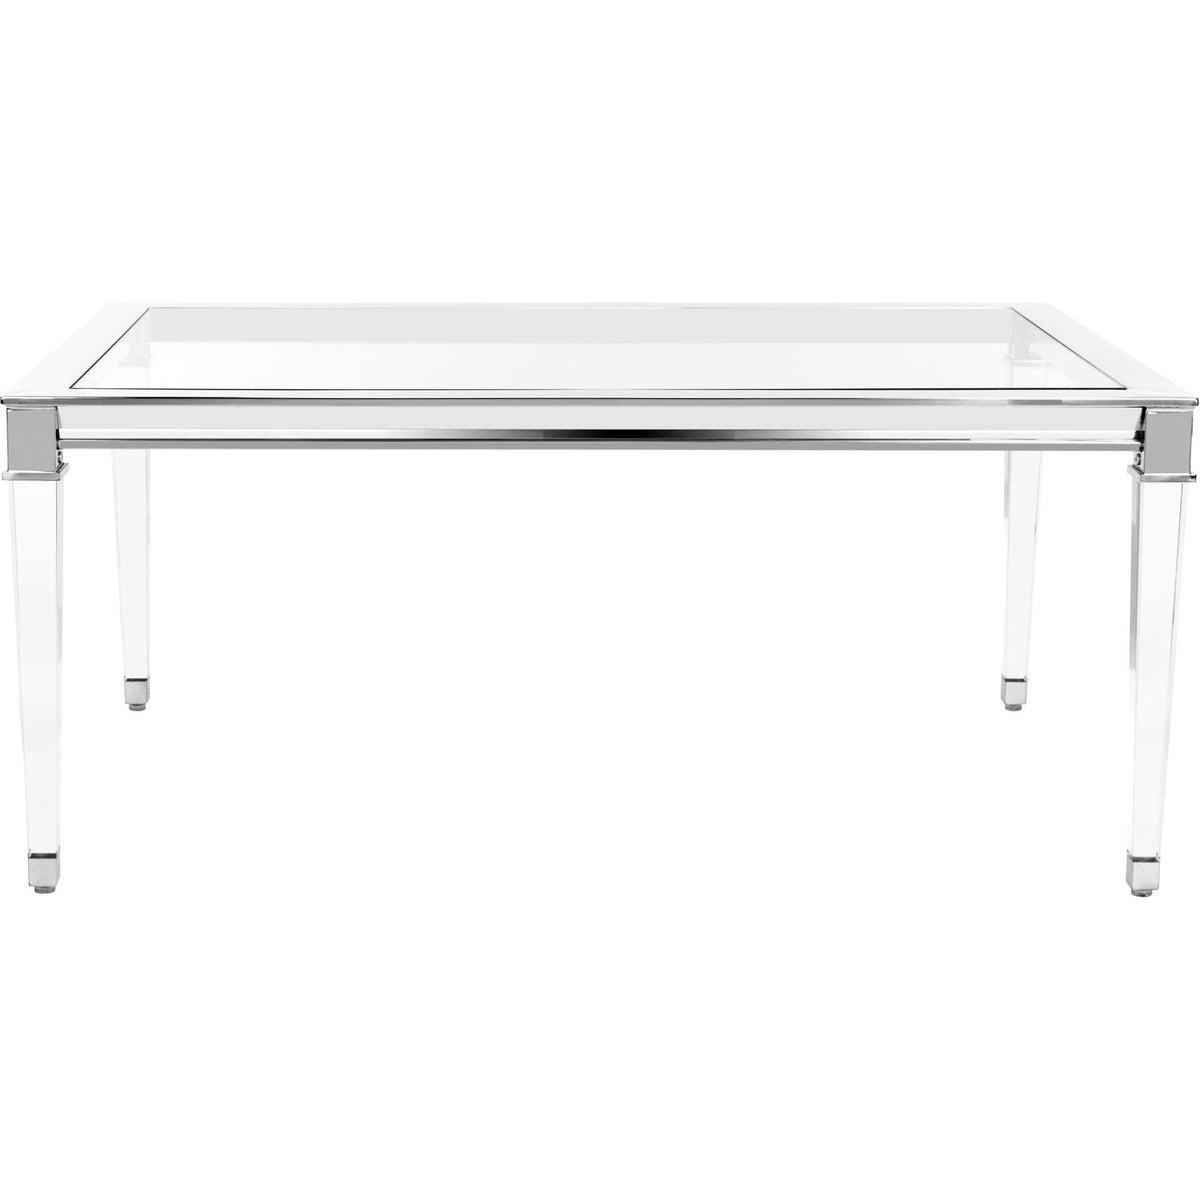 Channing Acrylic Coffee Table Silver